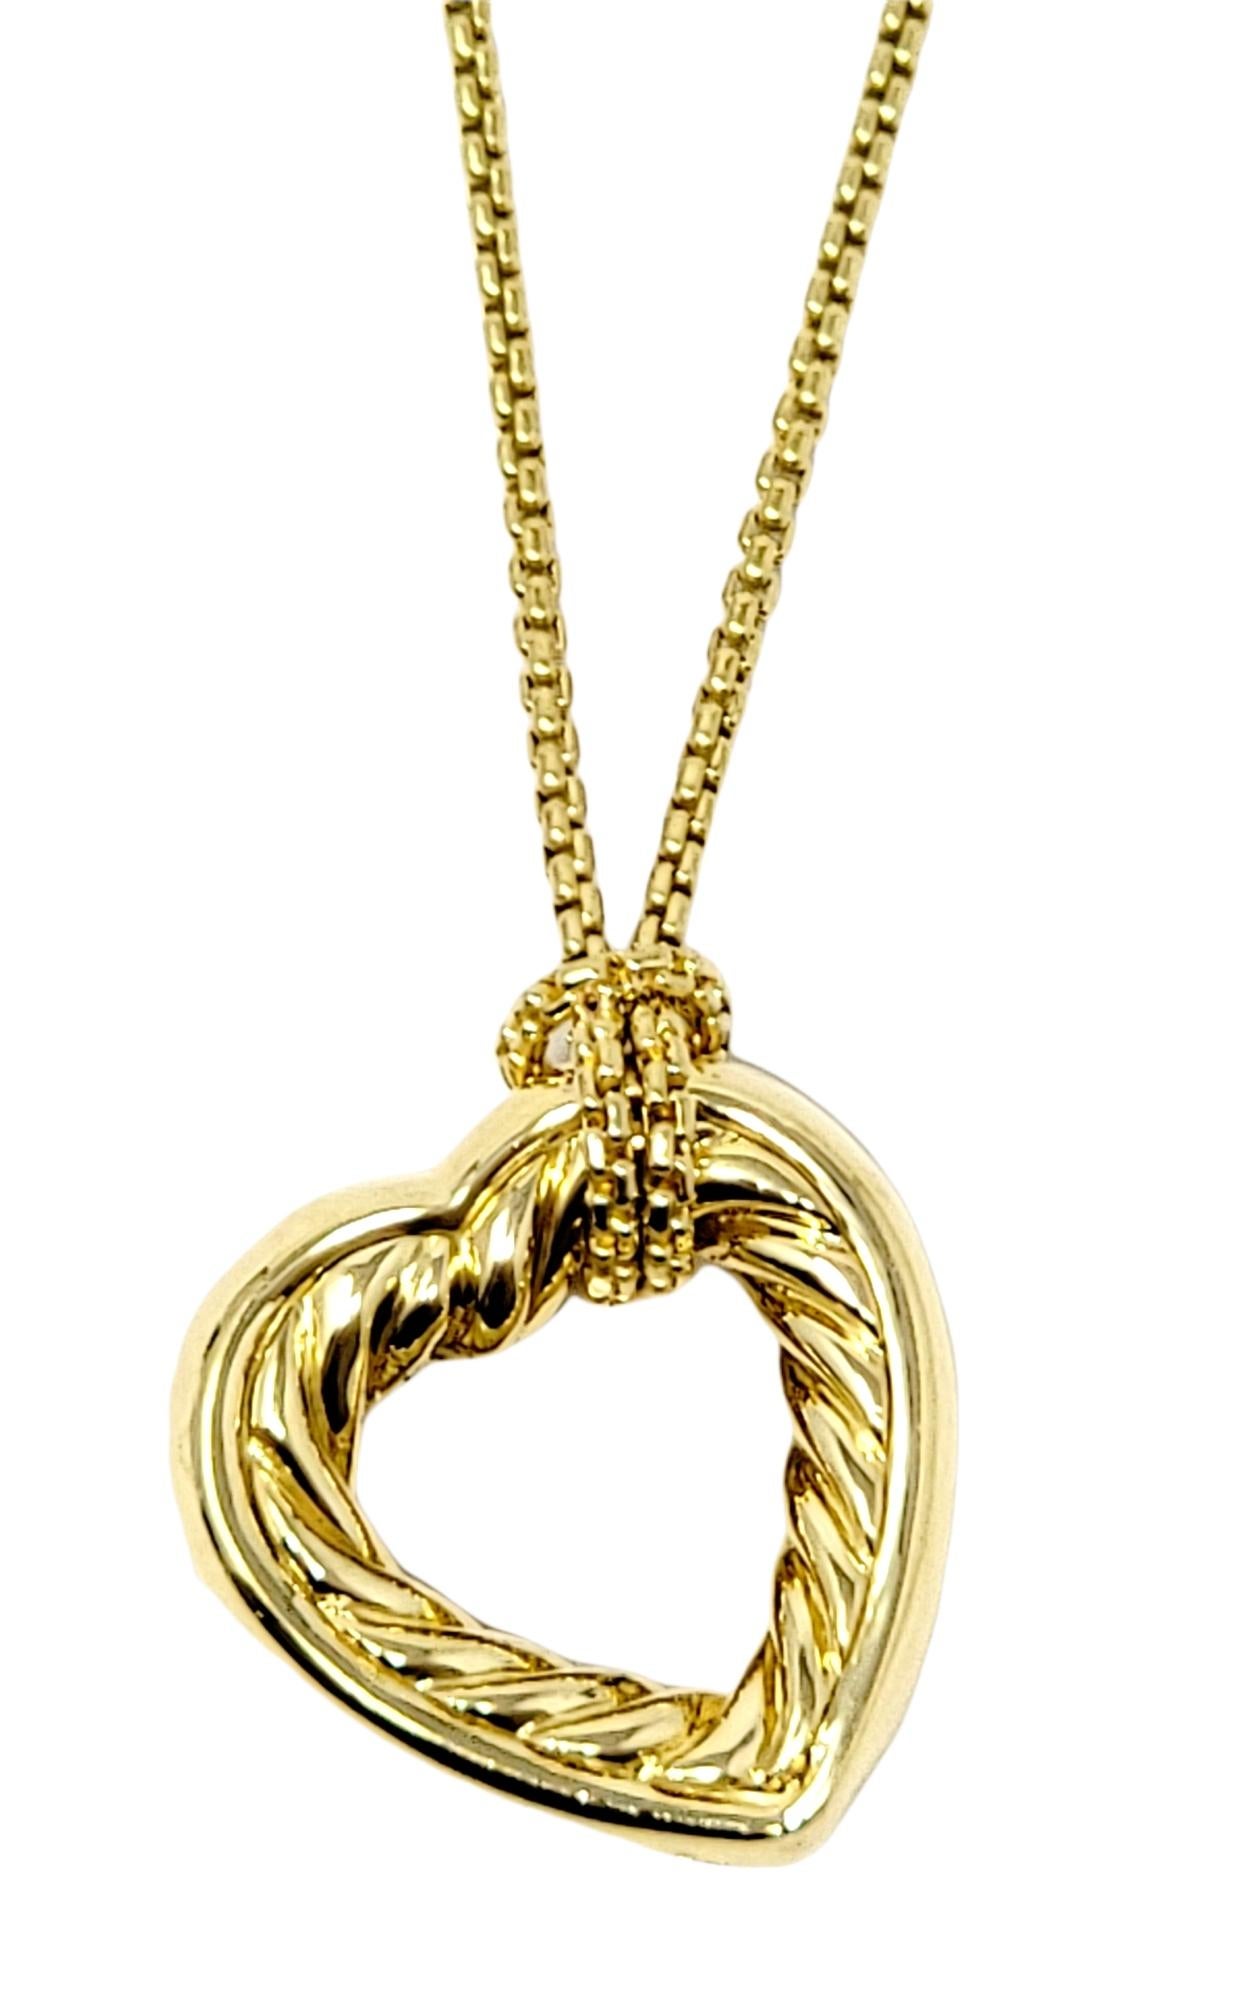 This beautiful designer necklace by David Yurman features a polished 18 karat yellow gold cable open heart pendant set at a slight diagonal and arranged on a delicate box chain.

Necklace type: Pendant
Metal: 18K Yellow Gold
Weight: 25.8 grams
Chain